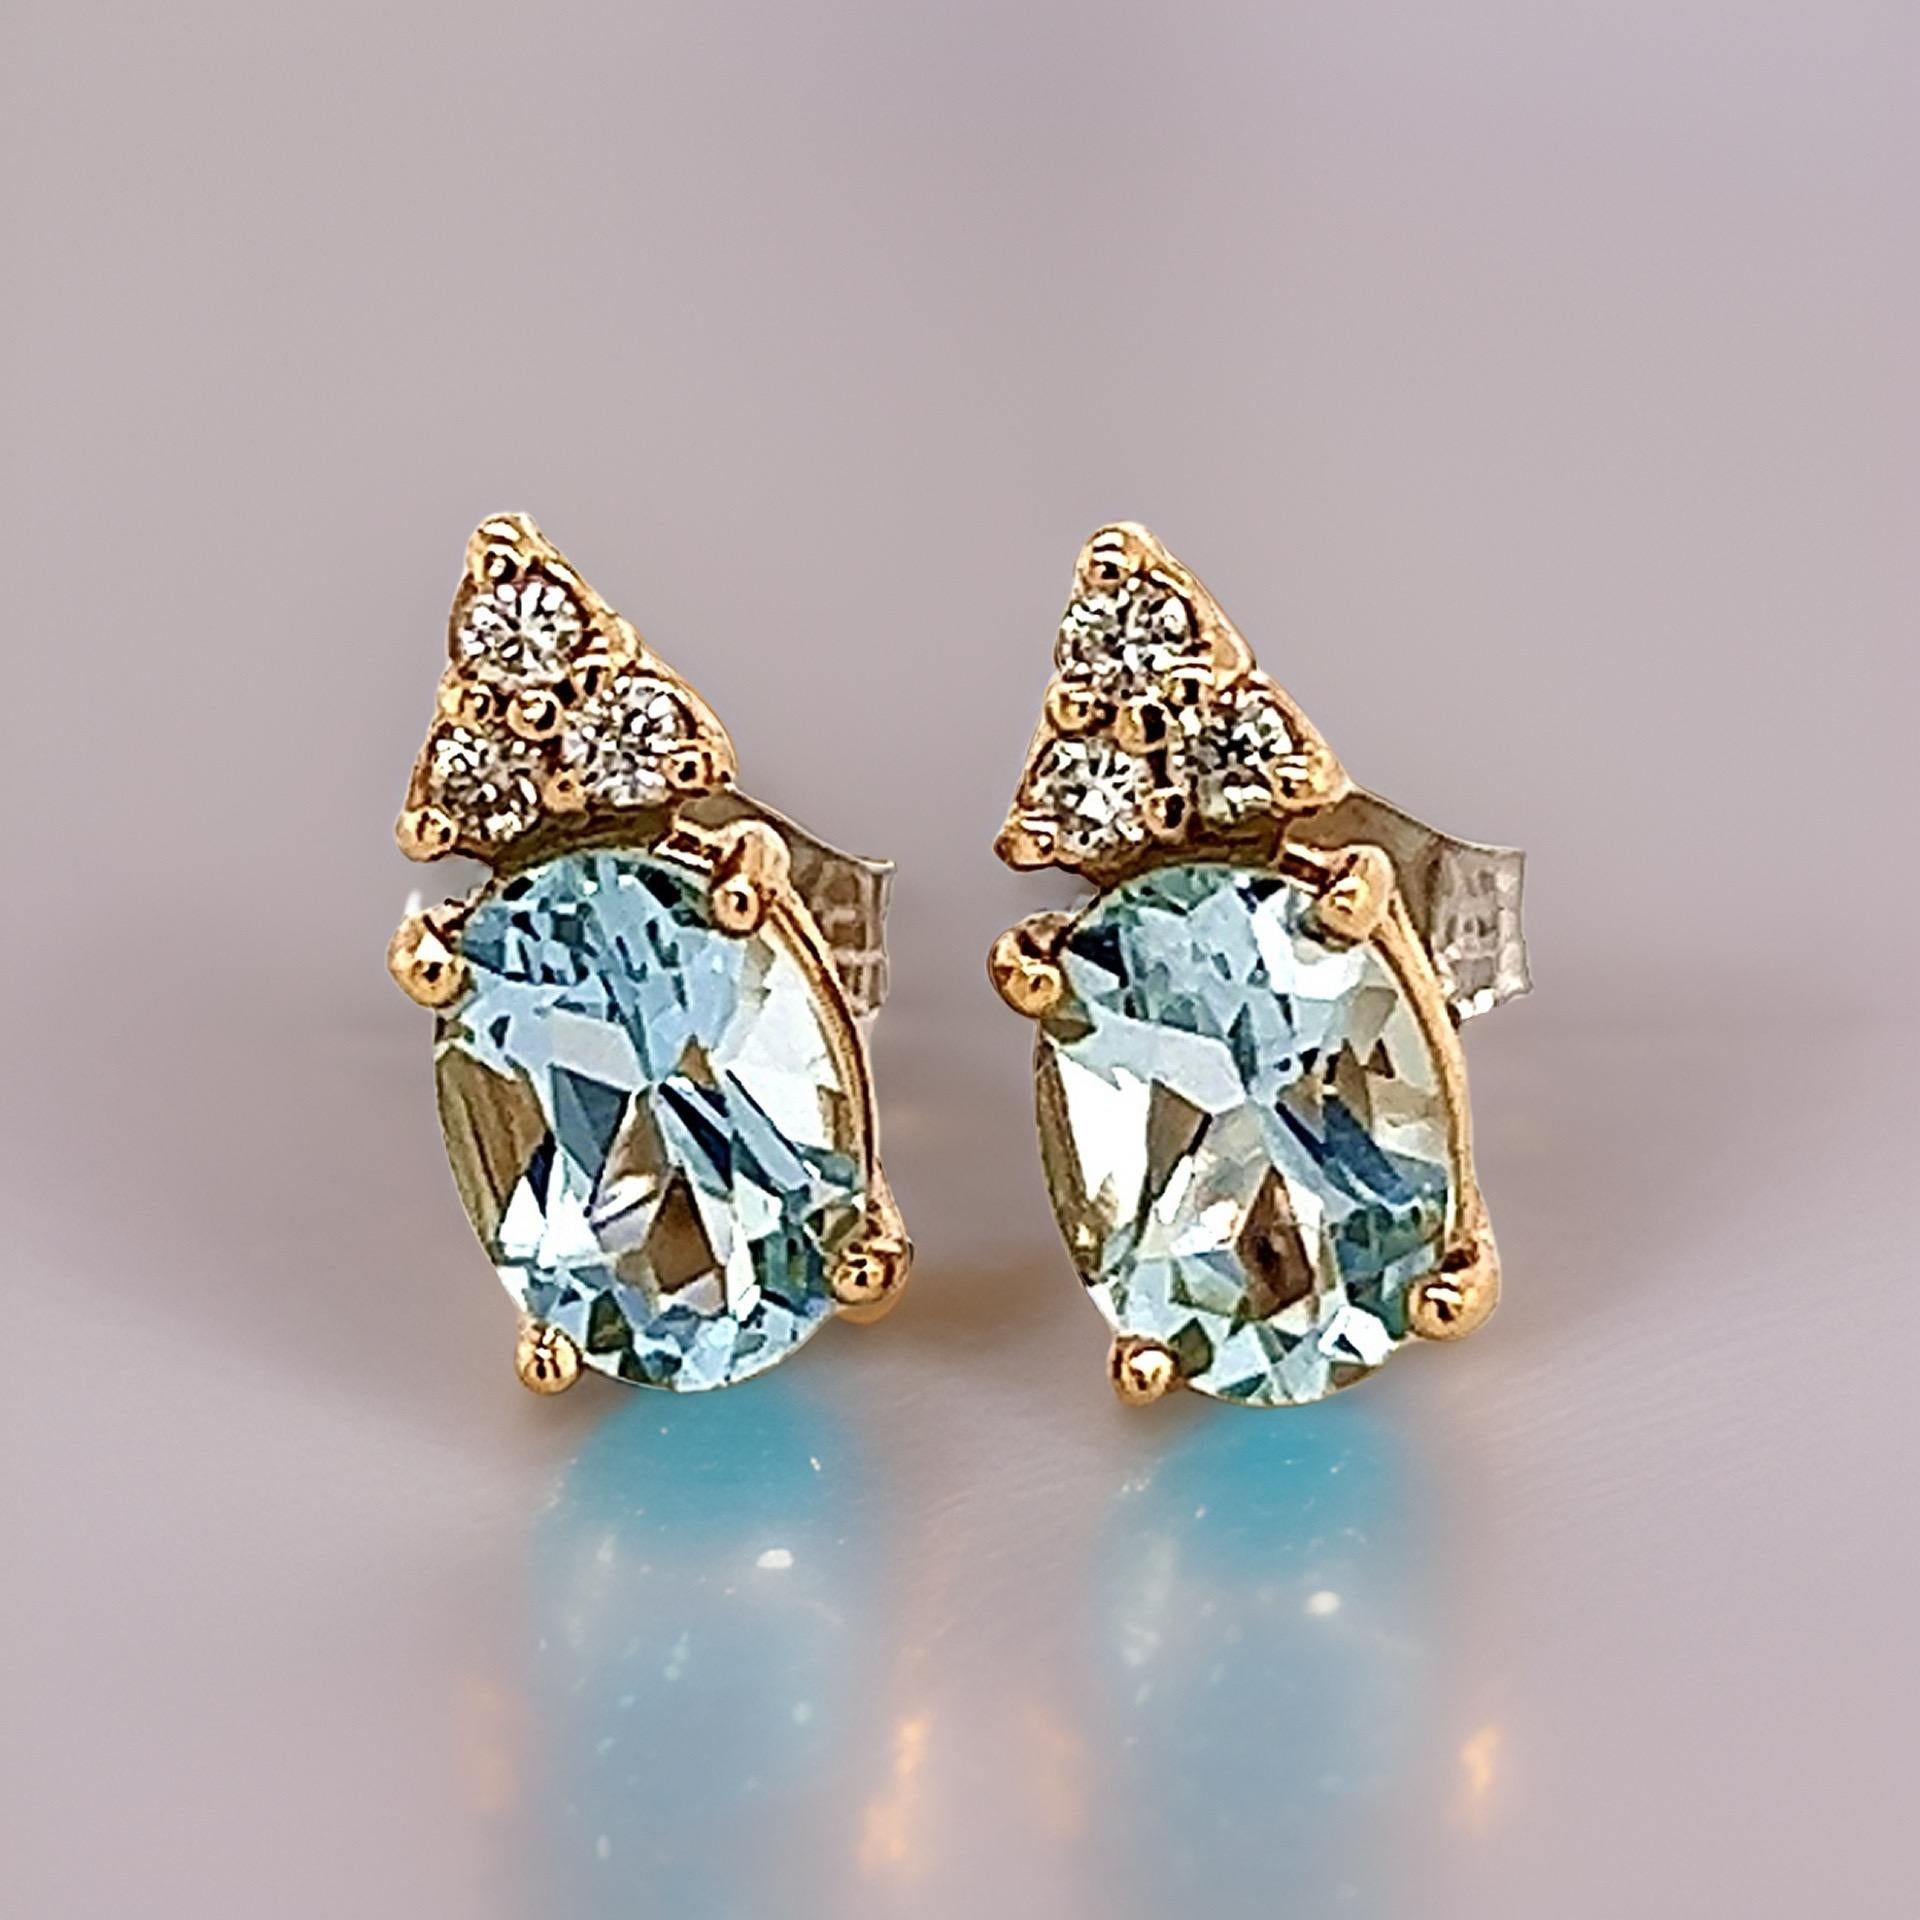 Natural Aquamarine Diamond Earrings 14k Y Gold 1.85 TCW Certified For Sale 4